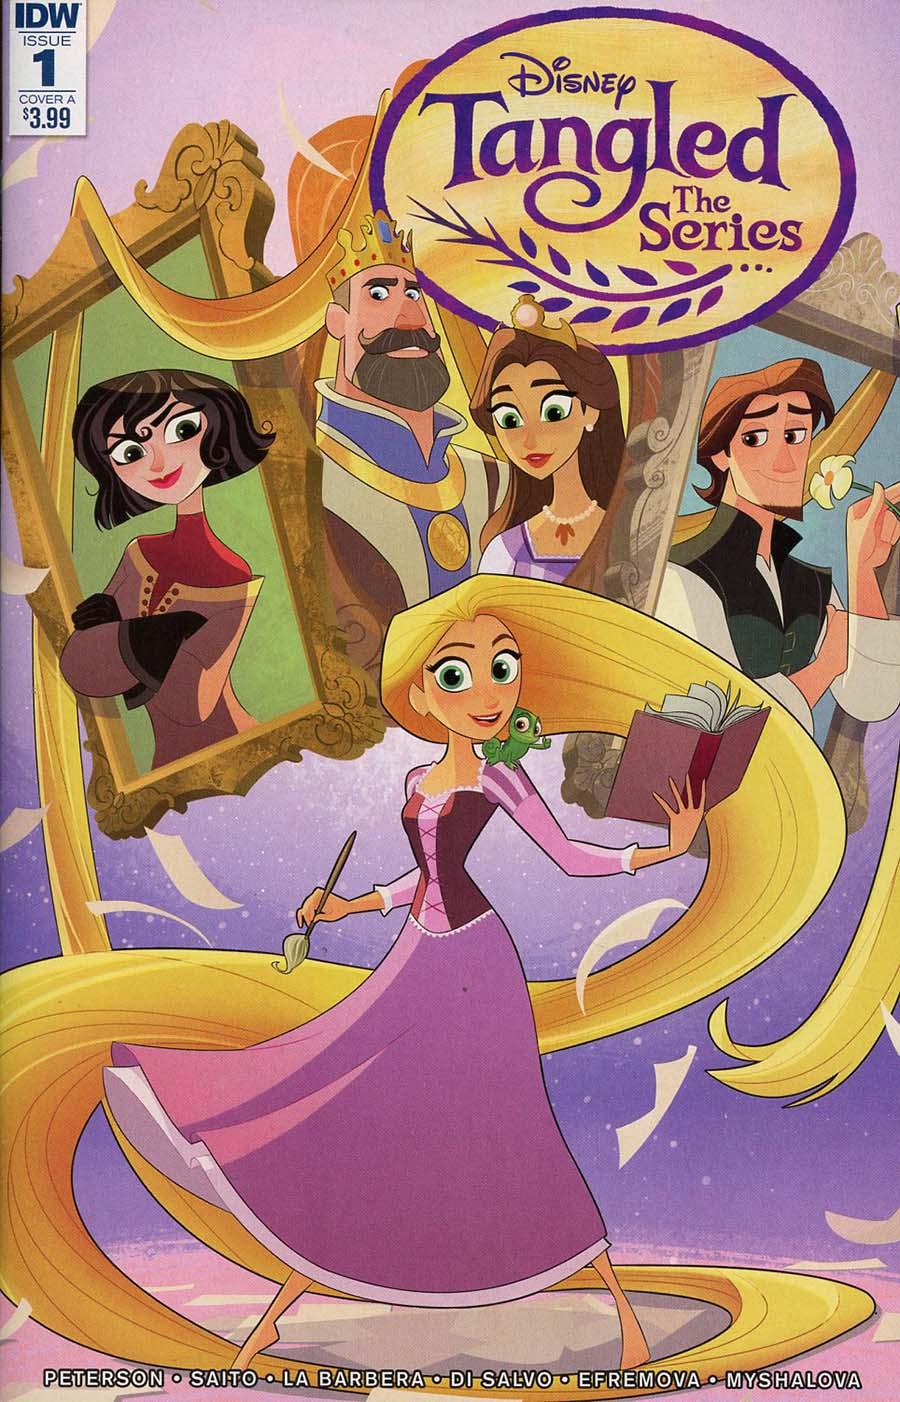 Tangled The Series Vol. 1 #1